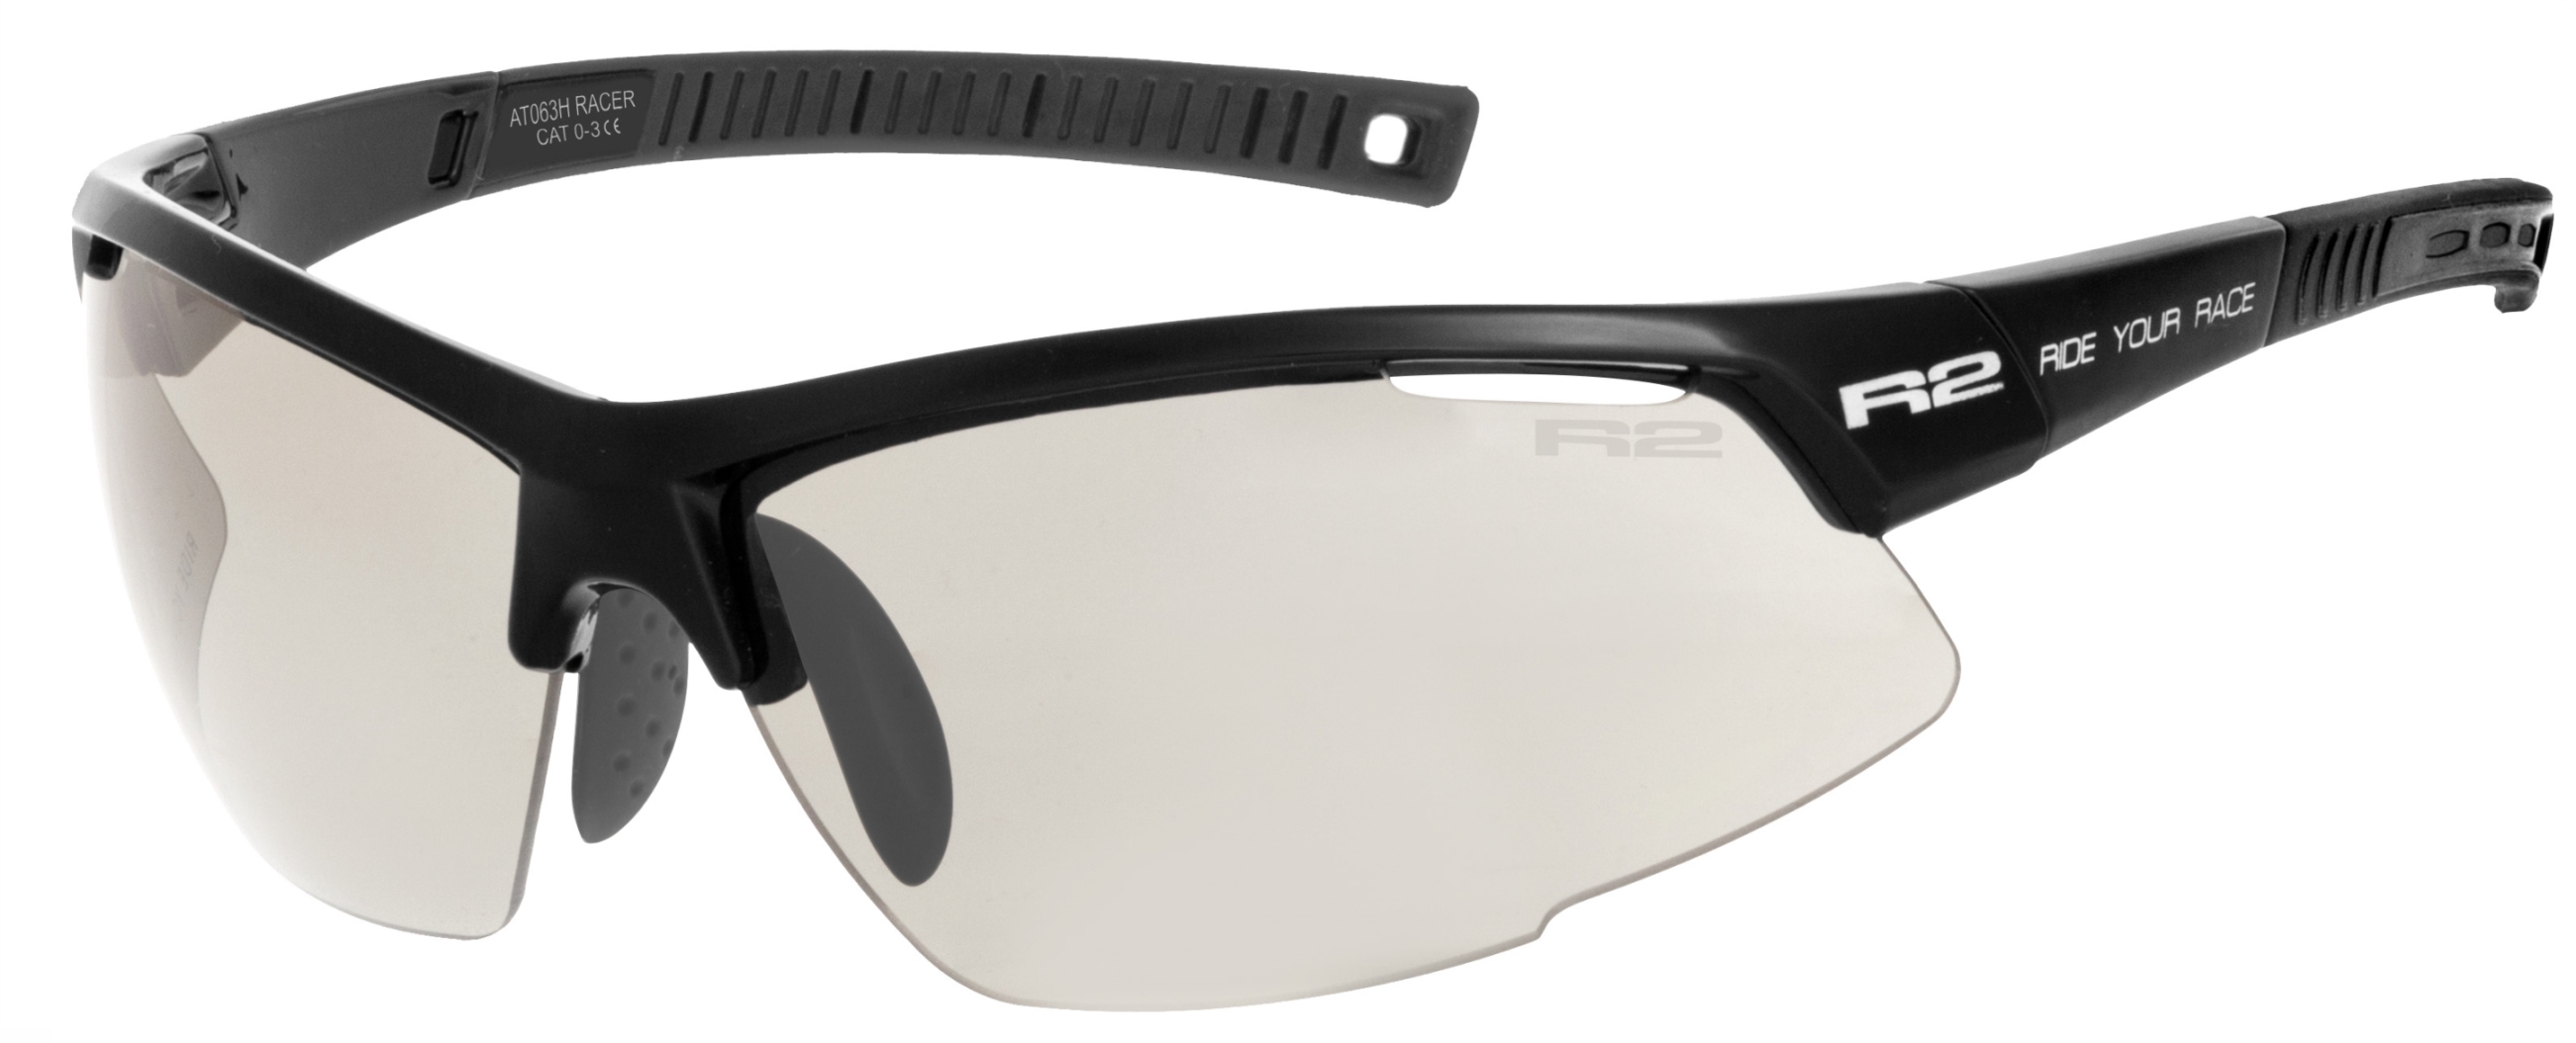 Photochromatic sunglasses  R2 RACER AT063H